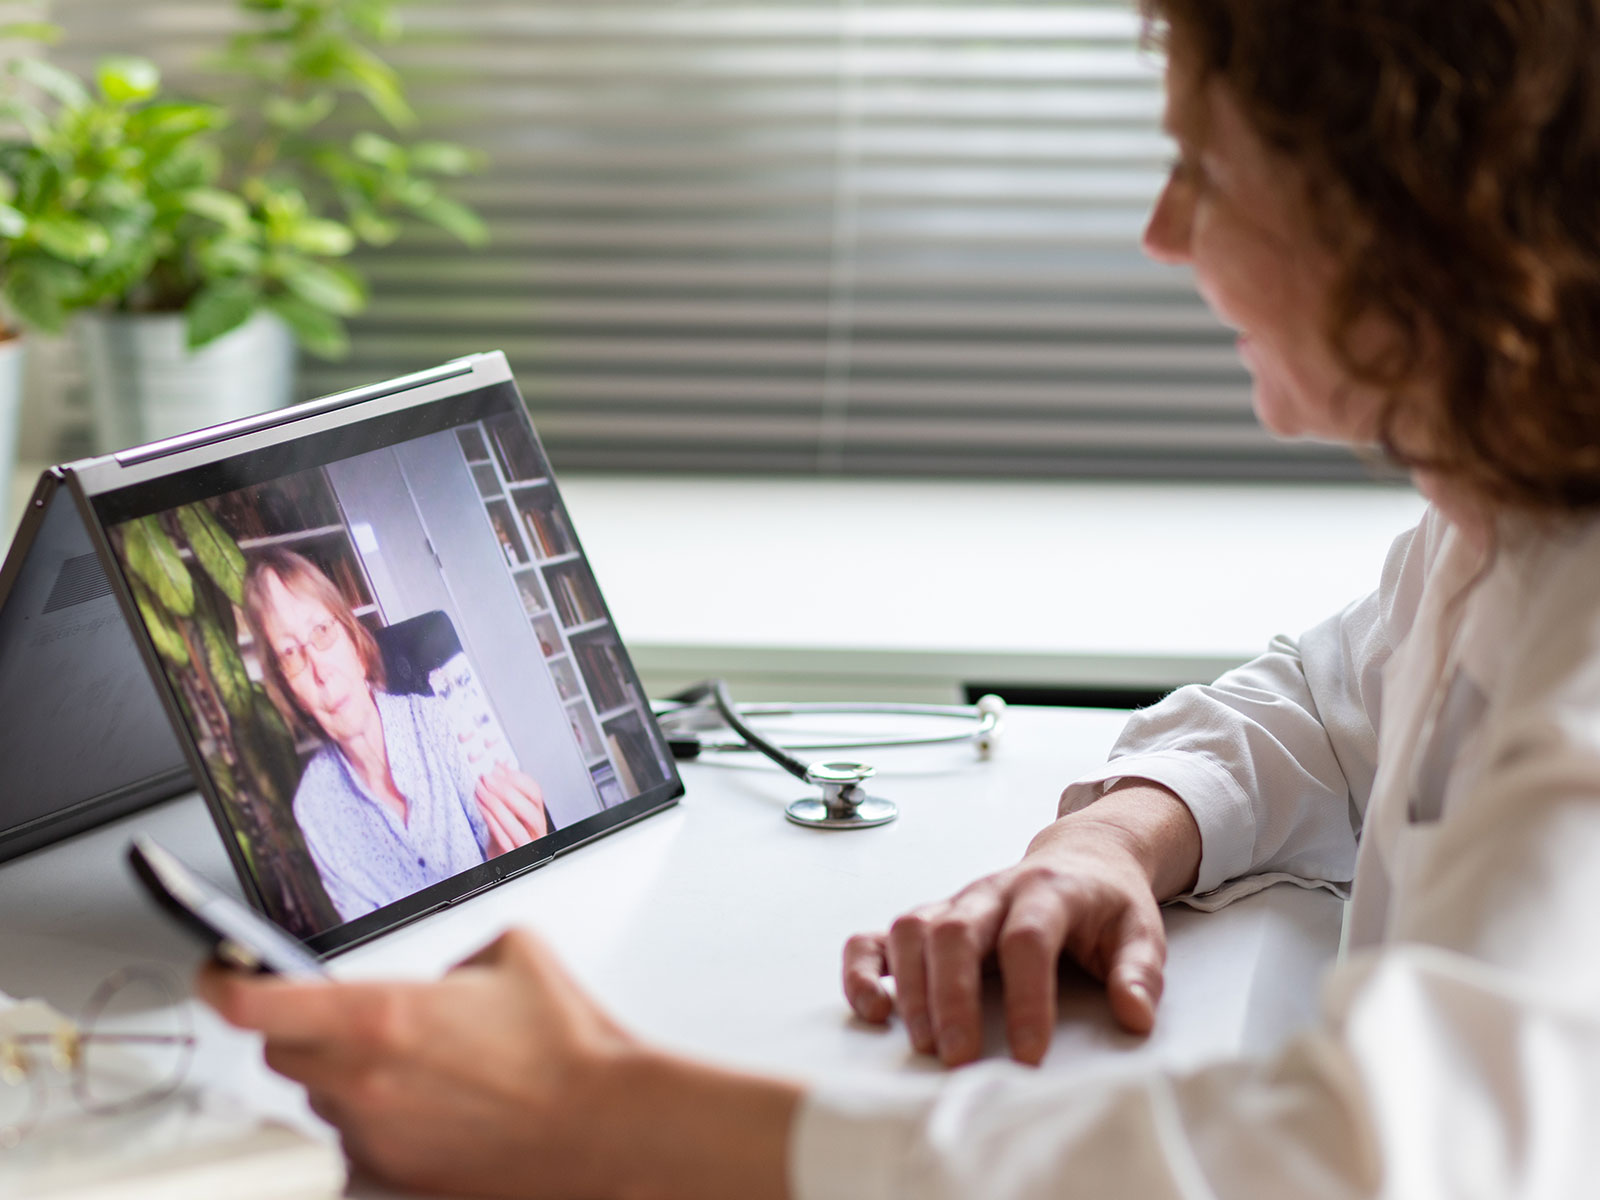 Doctor chats with patient during telehealth appointment.